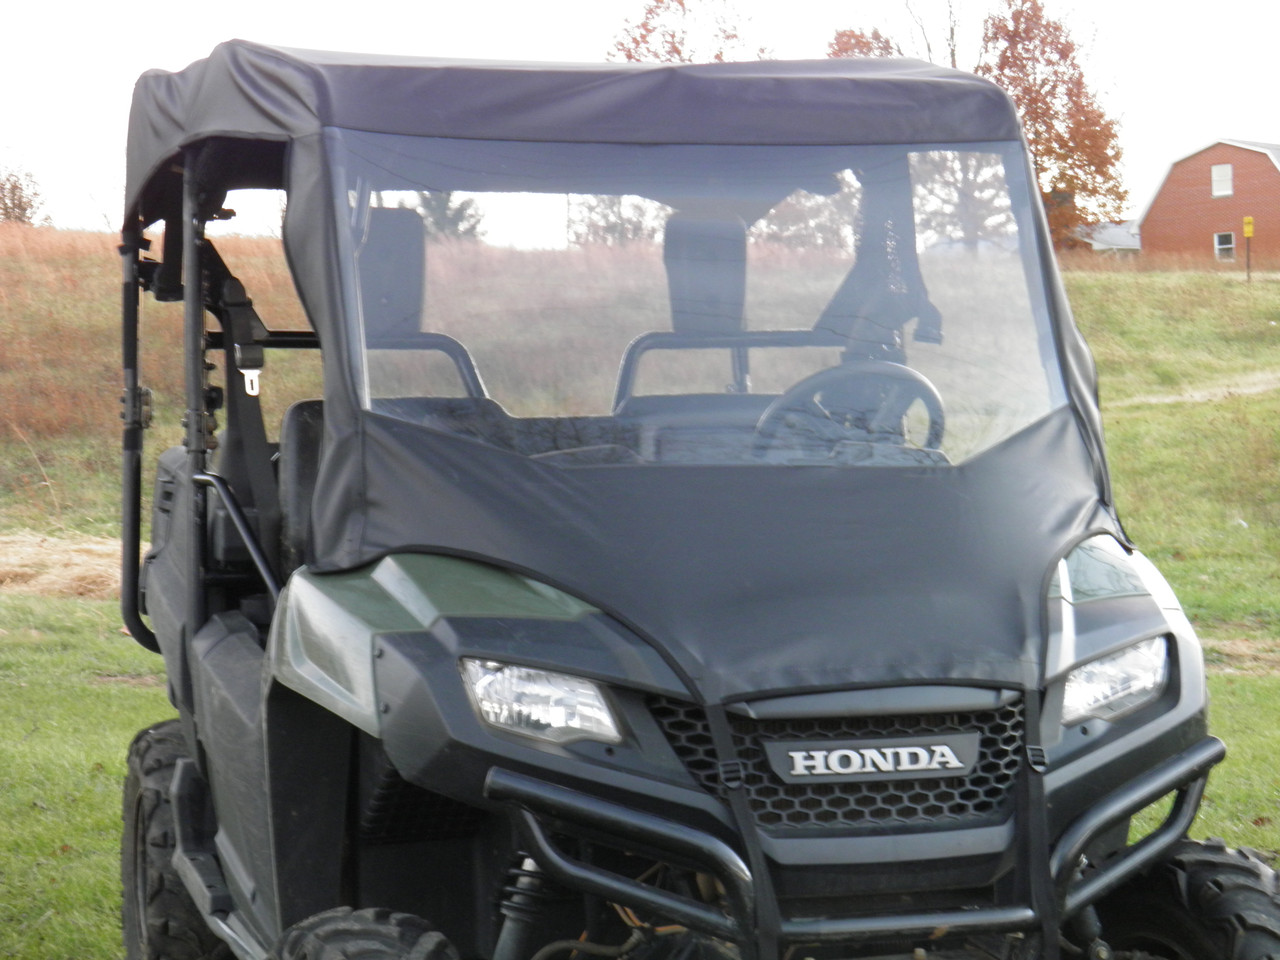 3 Star side x side Honda Pioneer 700-4 vinyl windshield and roof front view close up